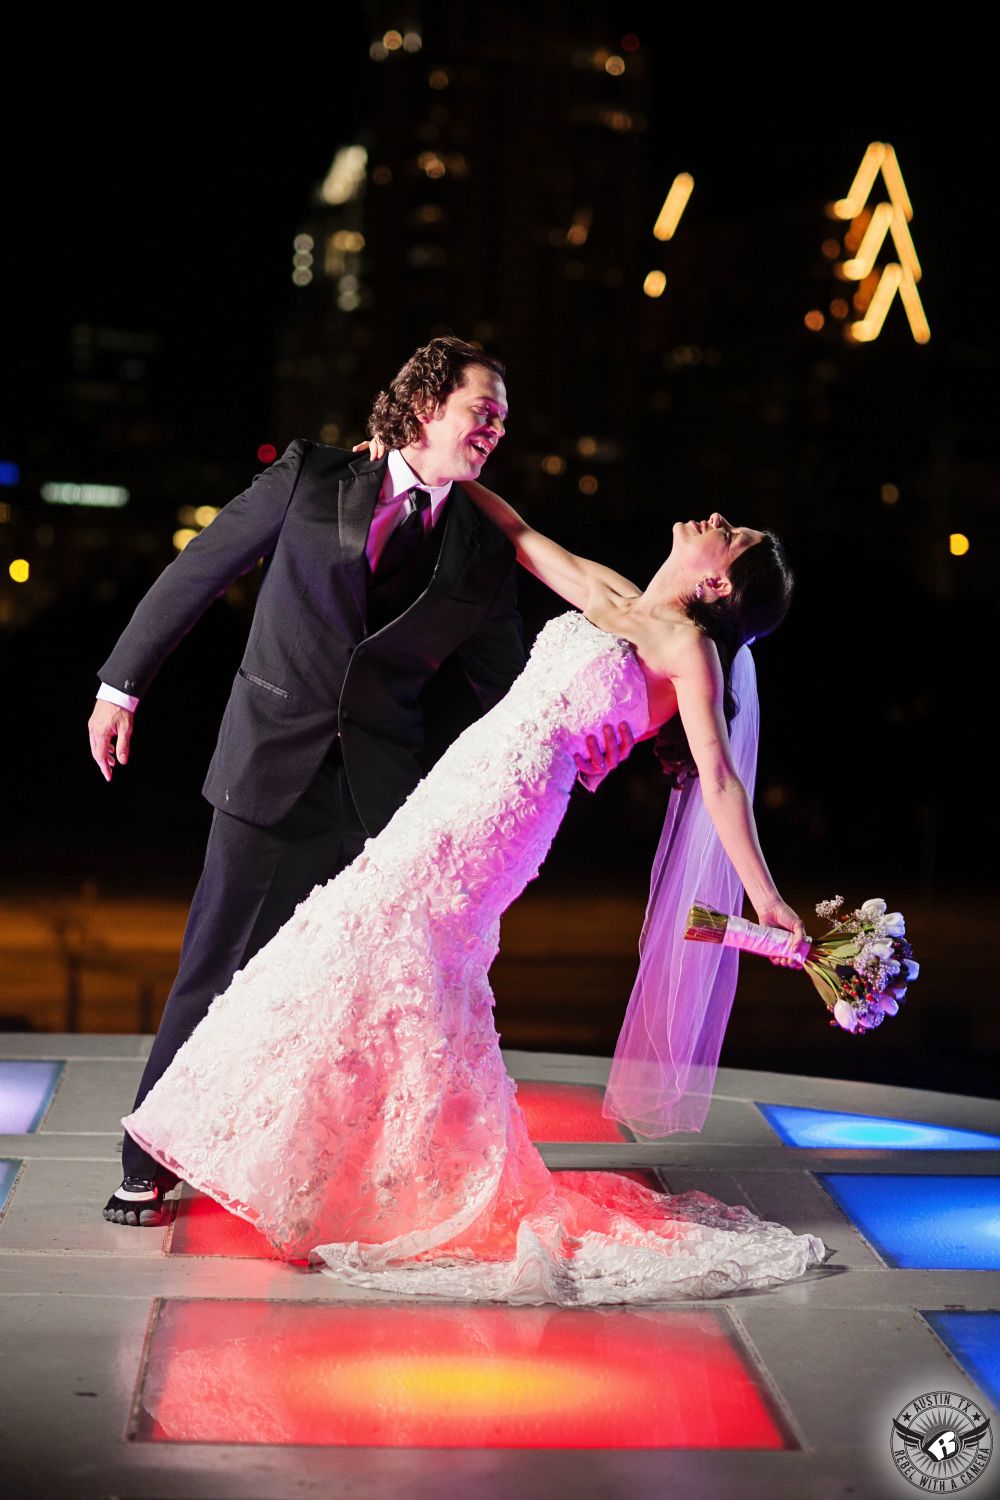 Austin wedding photography of groom in black tuxedo dipping bride in beaded white strapless wedding dress on colored light platform at the Long Center with the Austin skyline in the back at night during their wedding day.